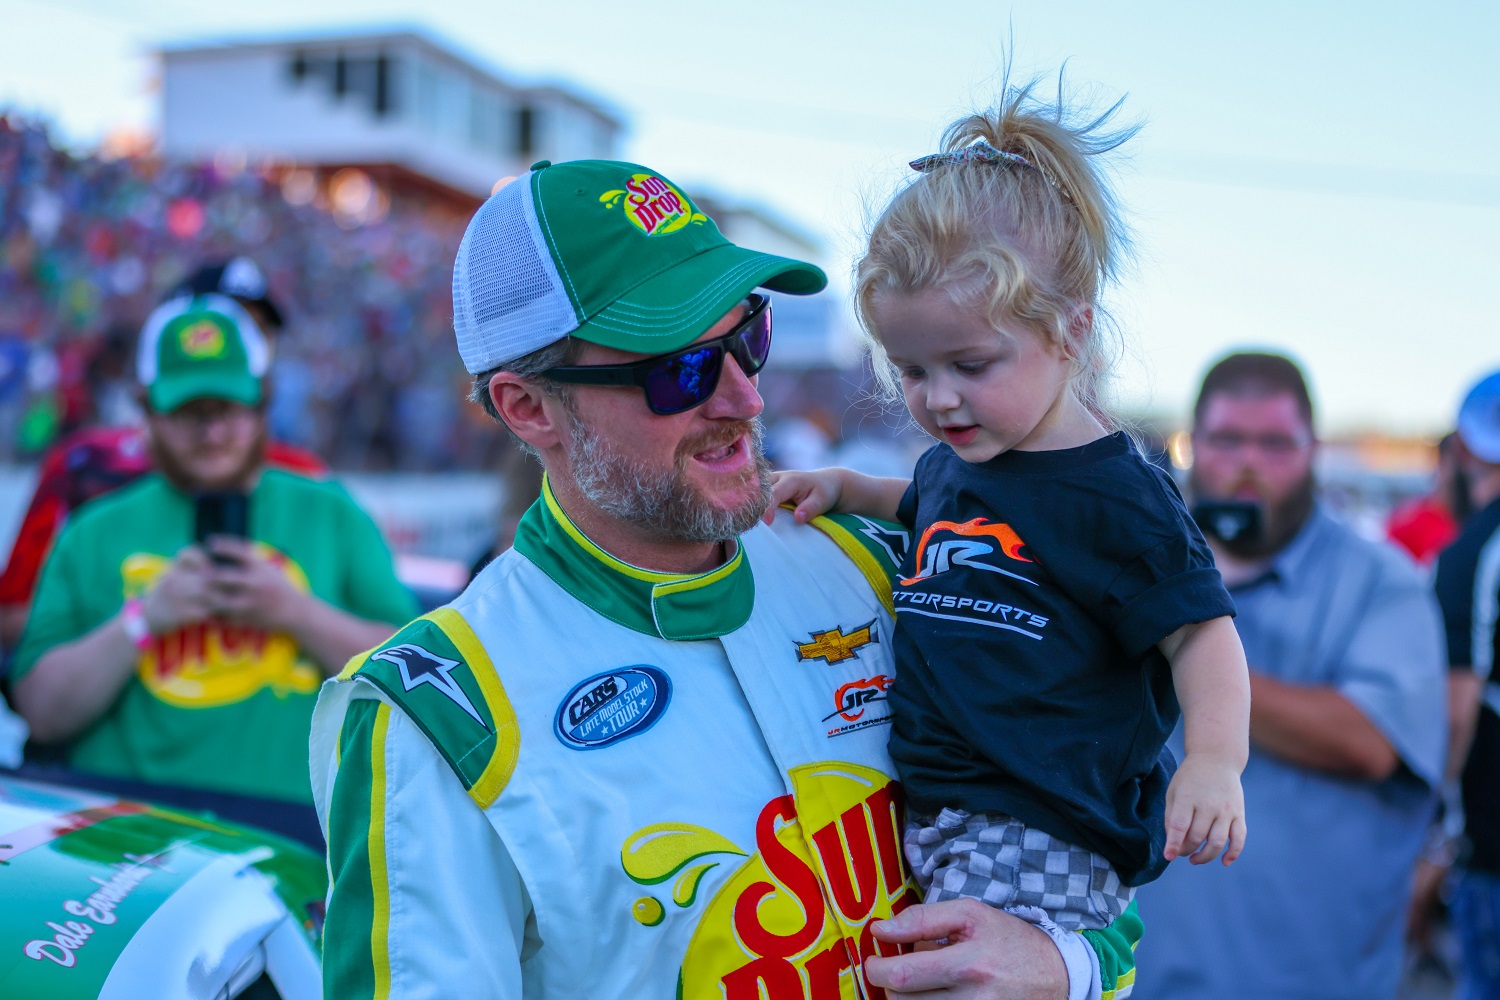 Dale Earnhardt Jr. spends time with his daughter before the LMSC 125 Auto Tour on August 31, 2022 at North Wilkesboro Highway.  |  David Jensen/Icon Sportswire via Getty Images